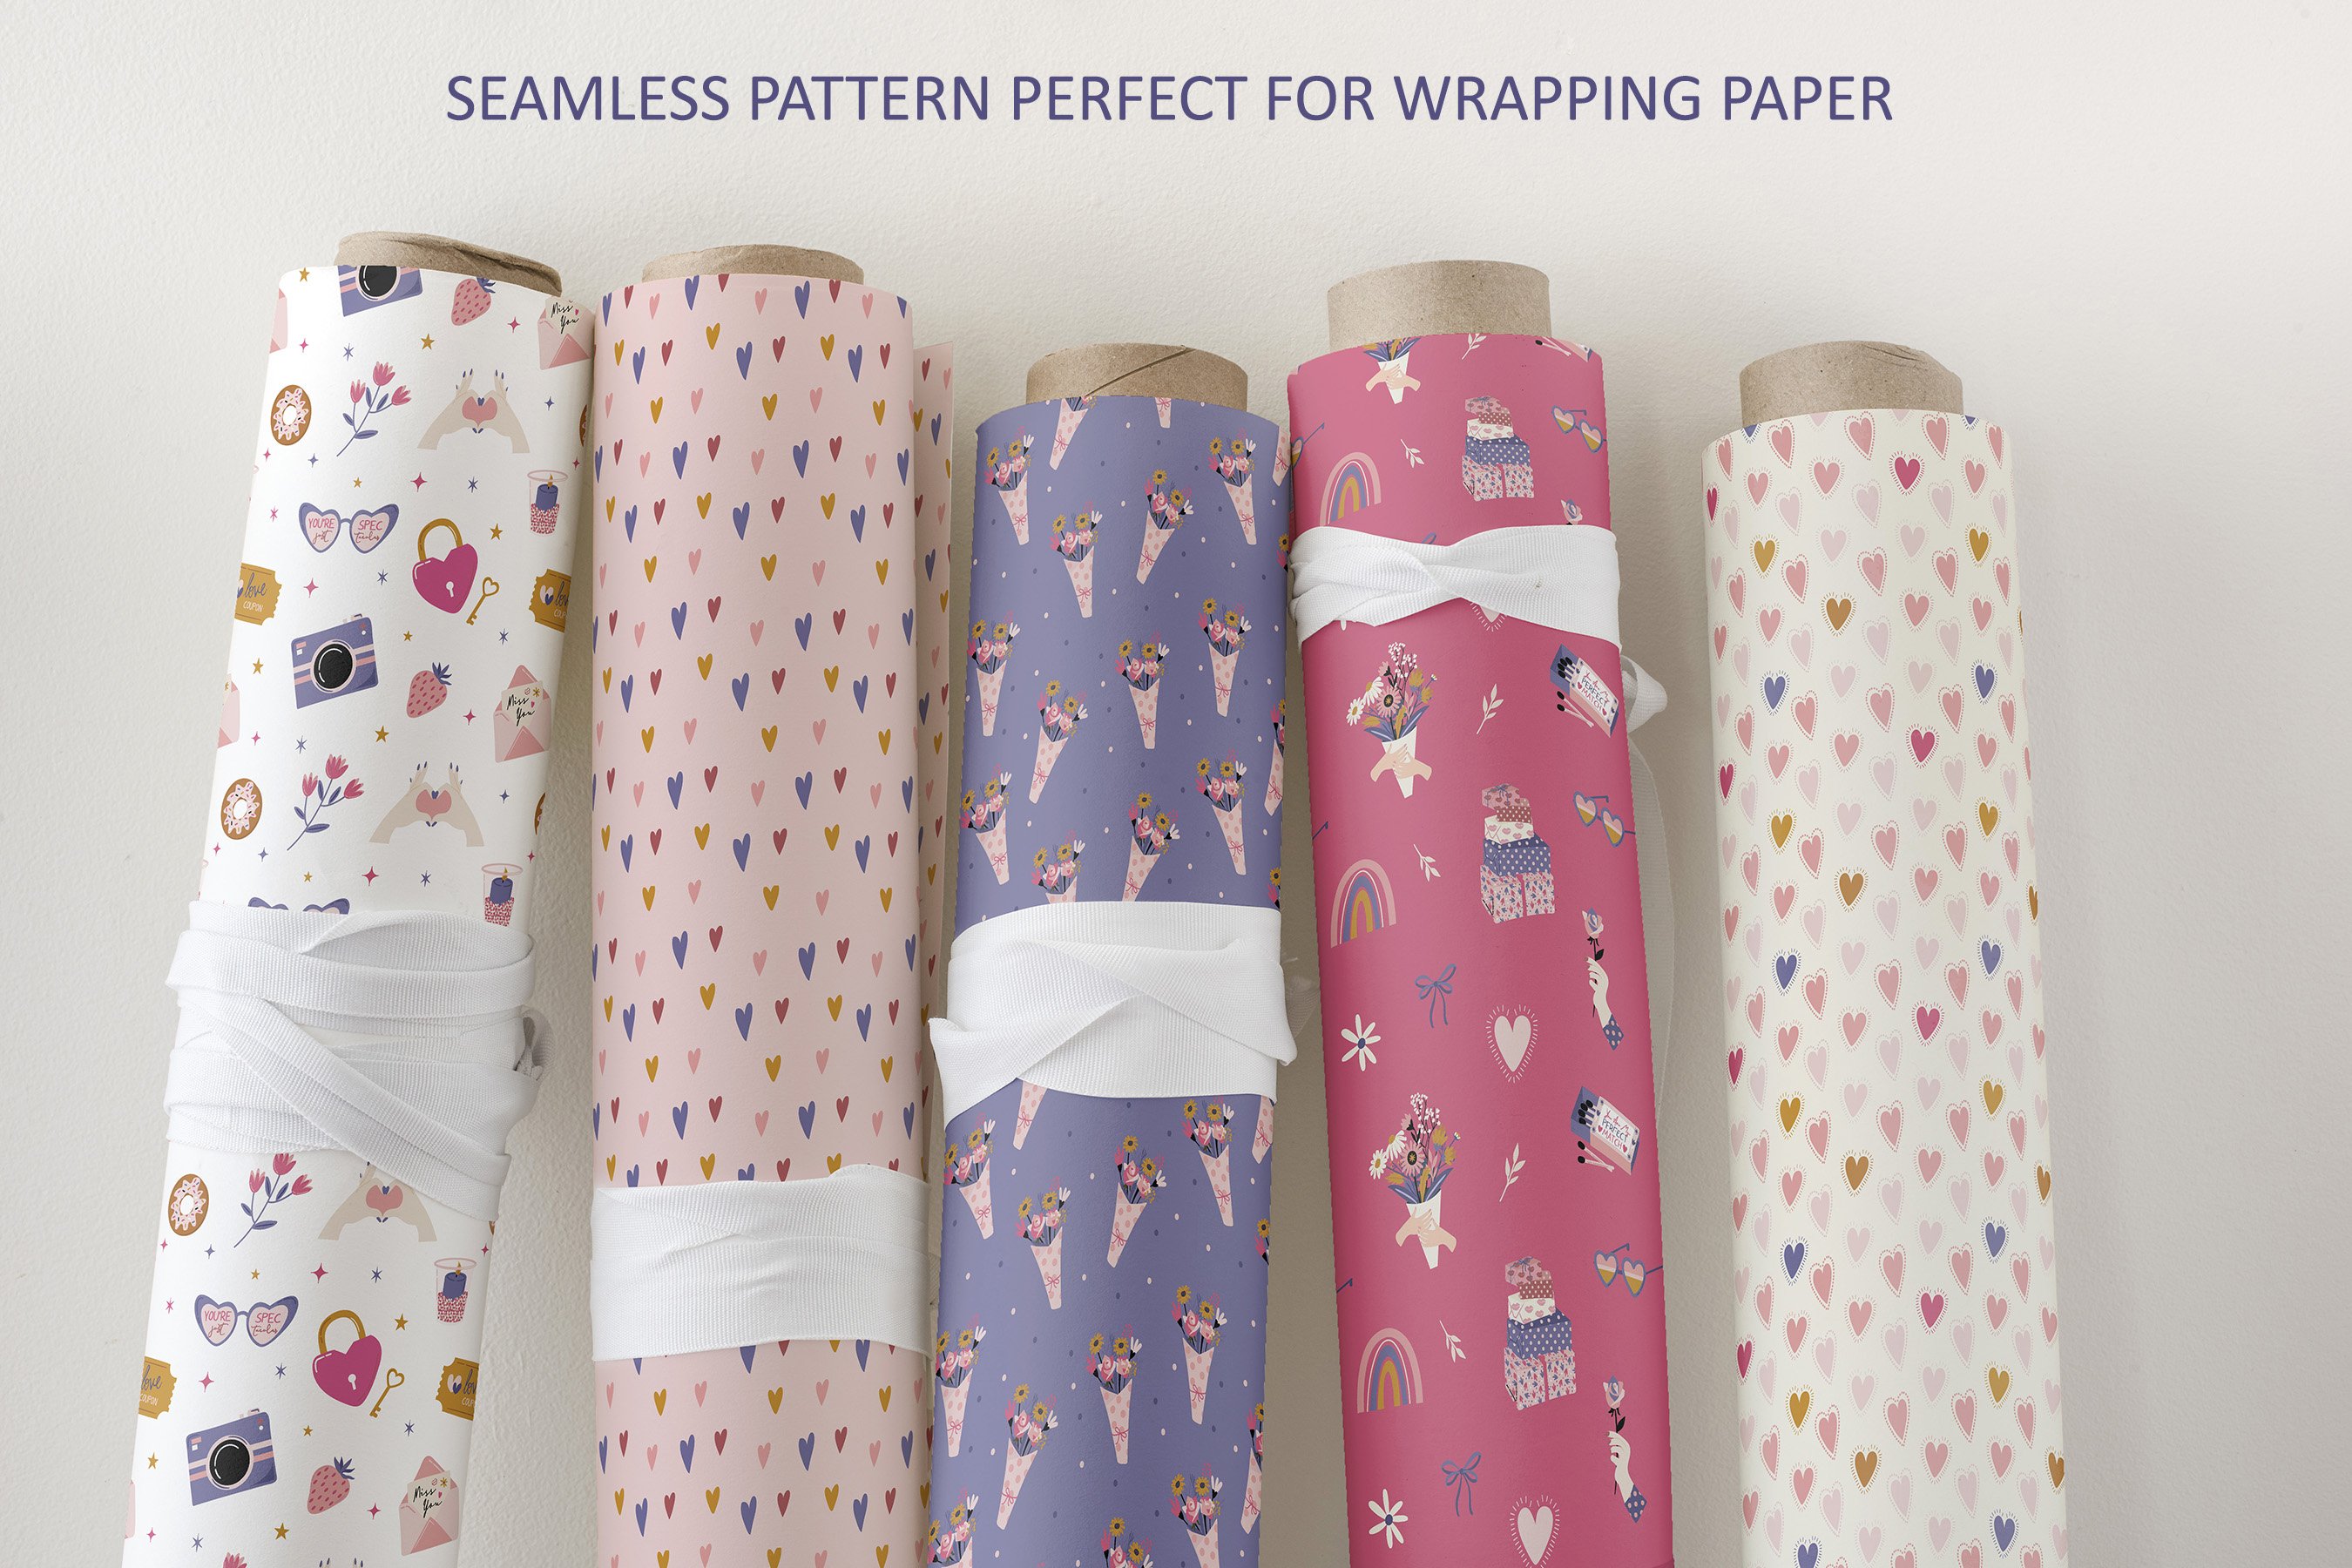 Seamless pattern perfect for wrapping paper.